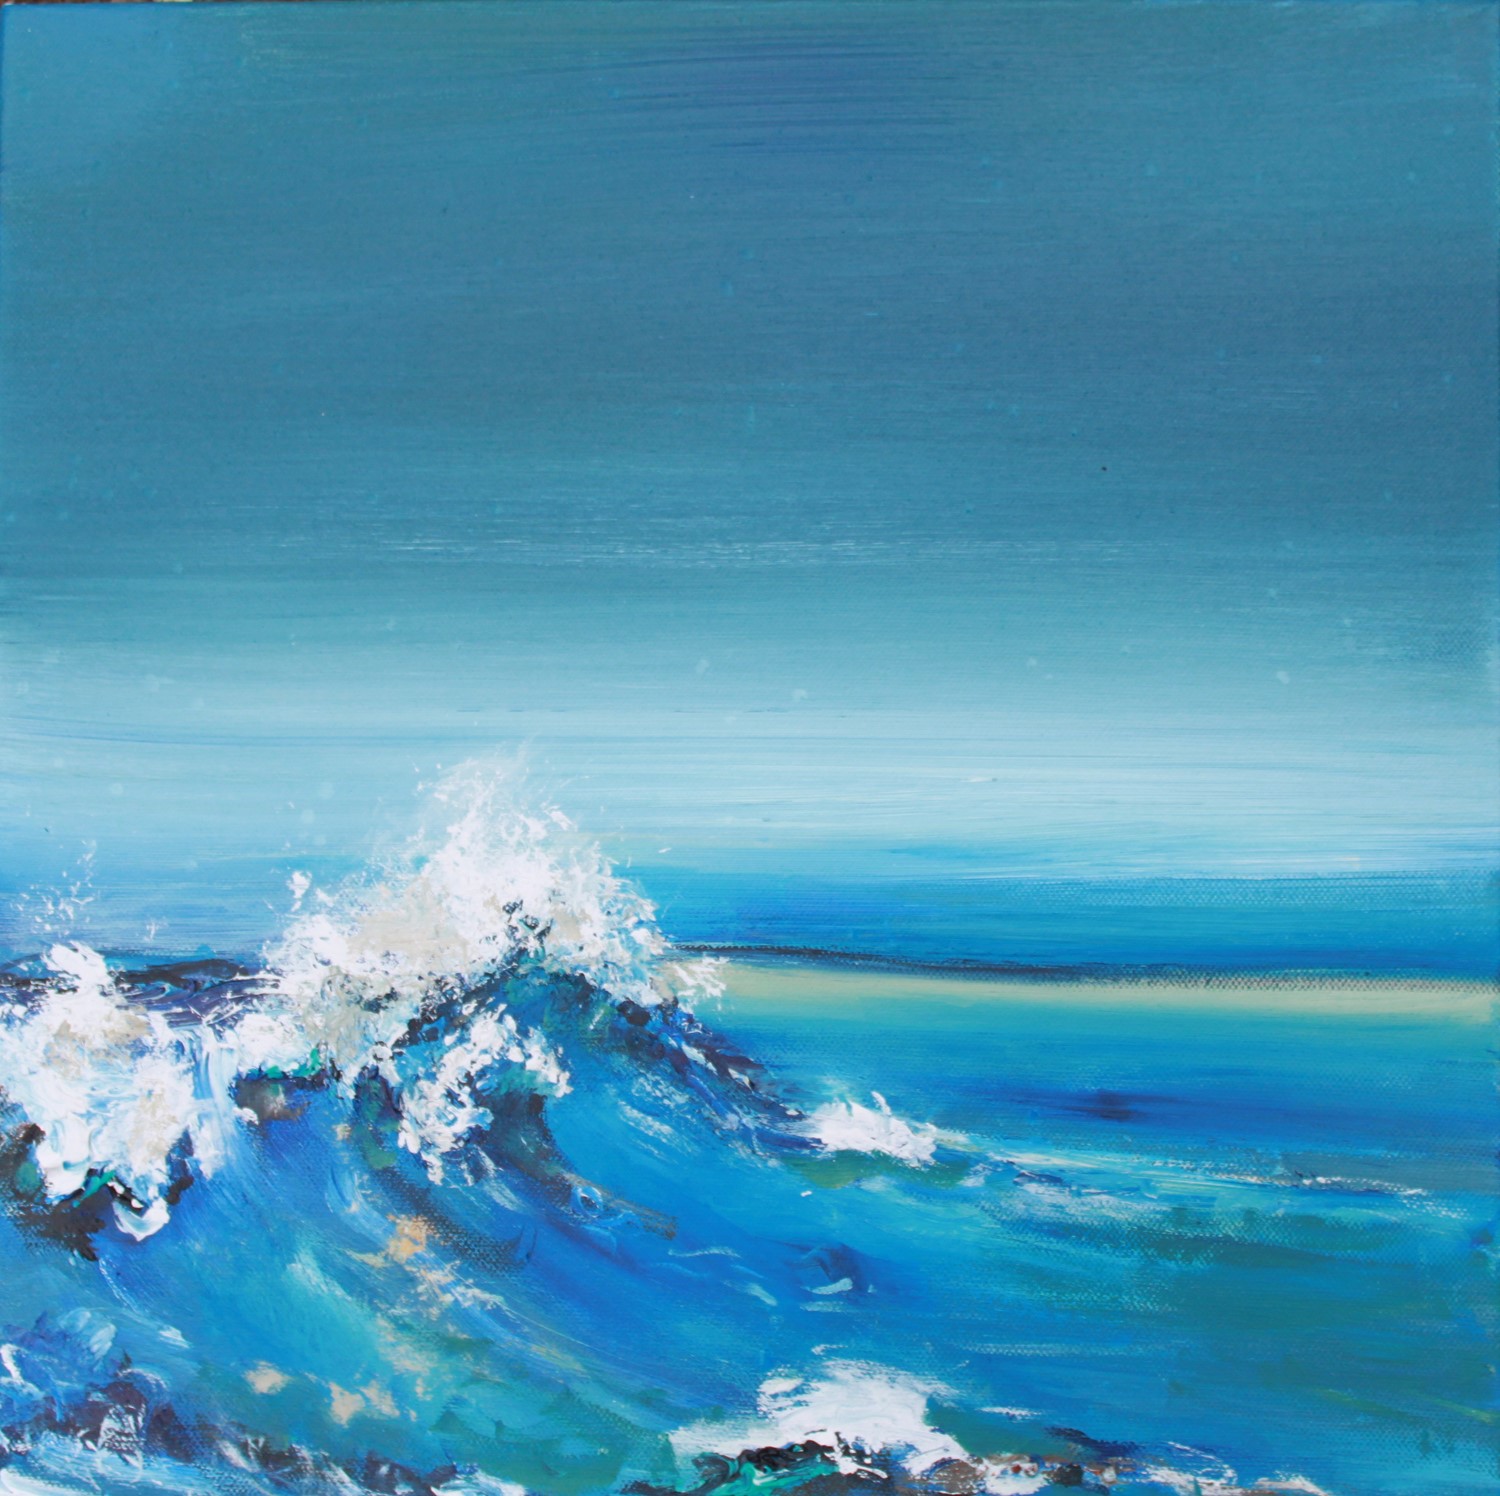 'Counting waves' by artist Rosanne Barr